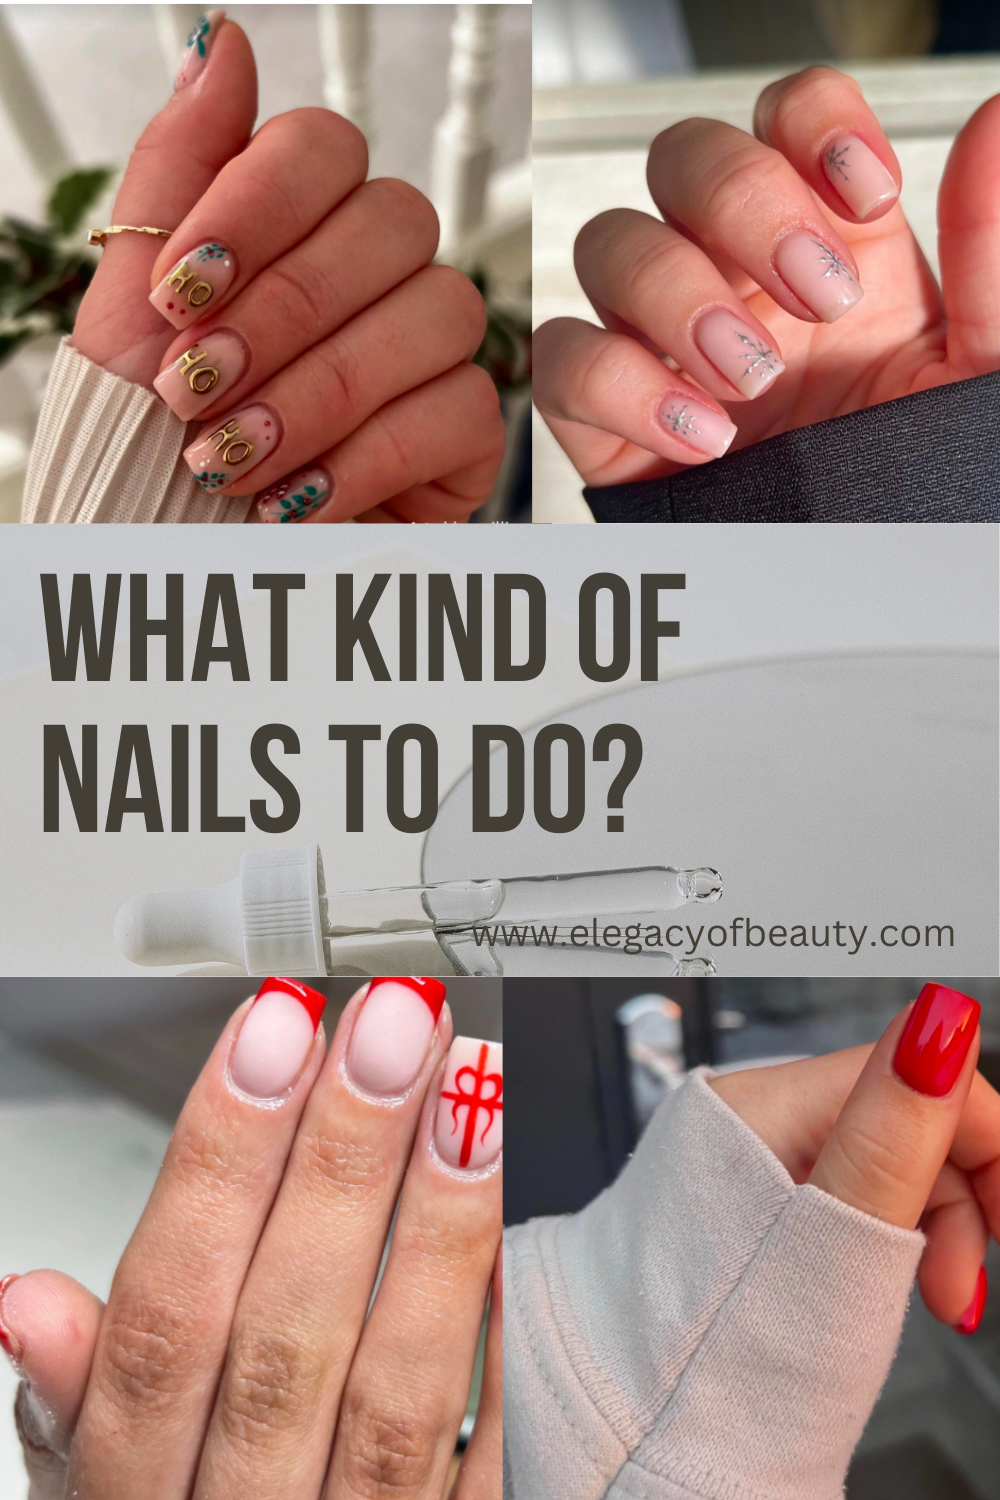 What Kind of Nails to do?